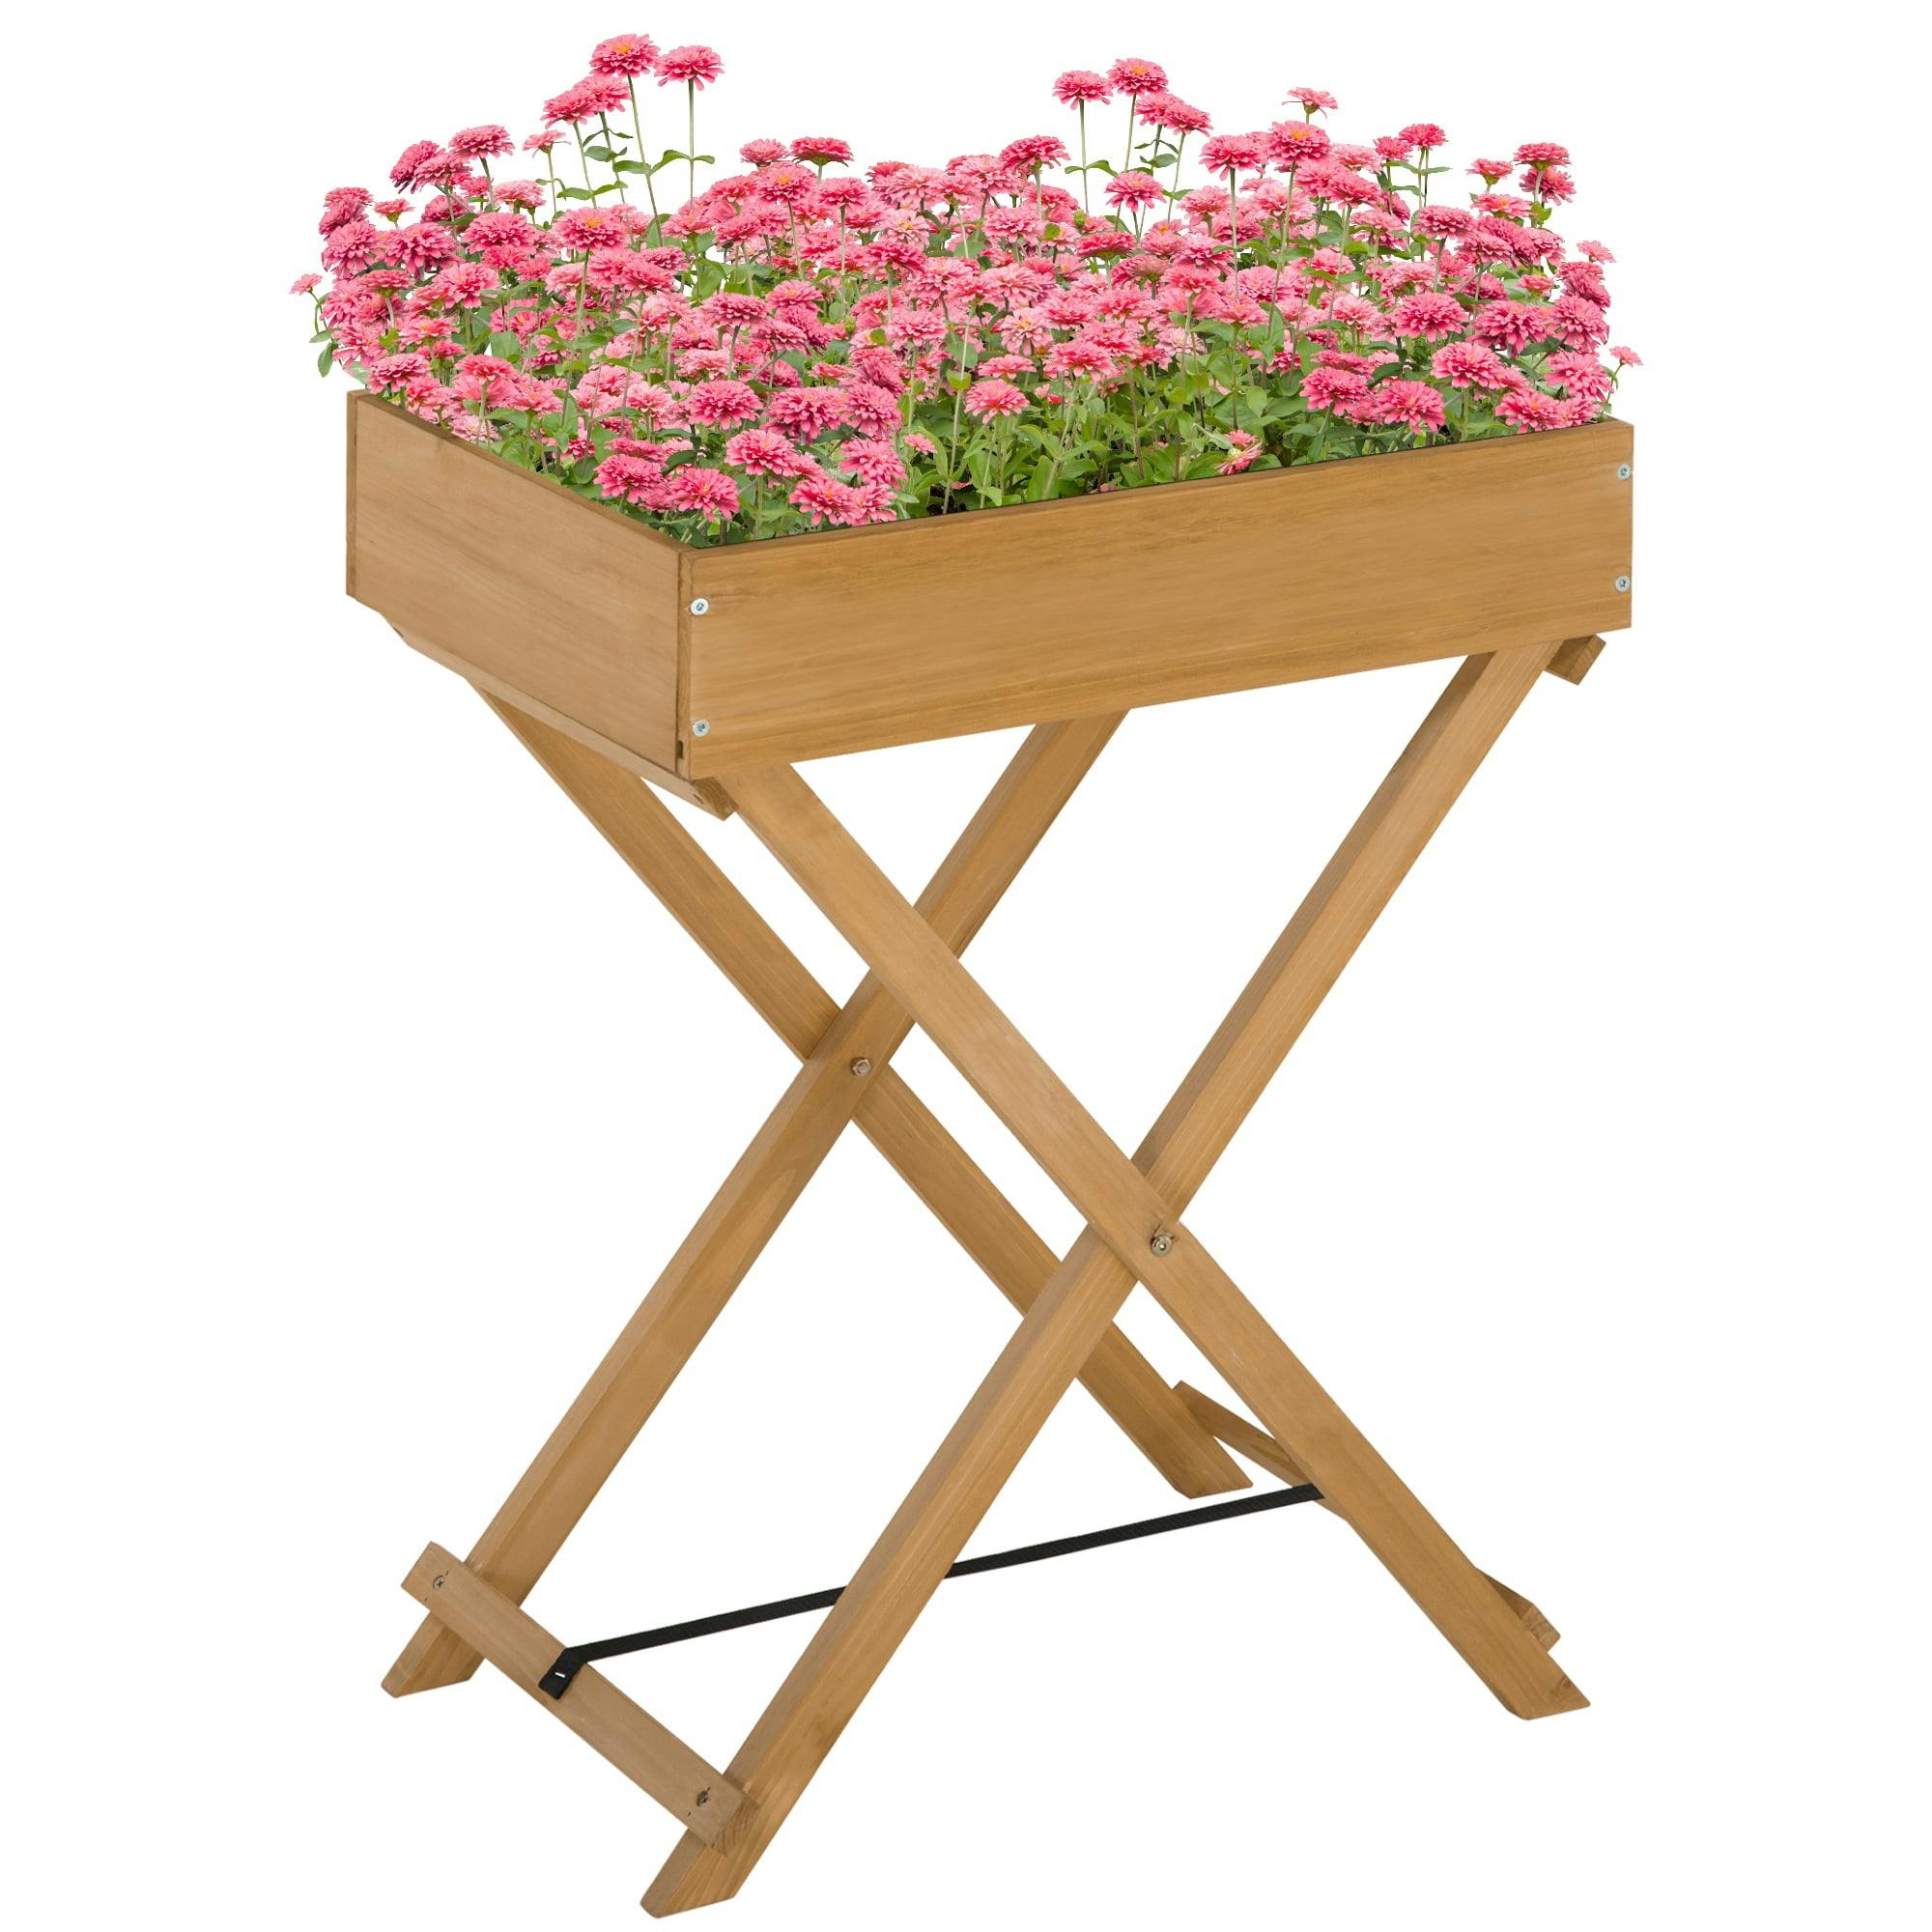 Compact Elevated Wooden Planter Box with 9 Herb Pockets for Outdoor Spaces